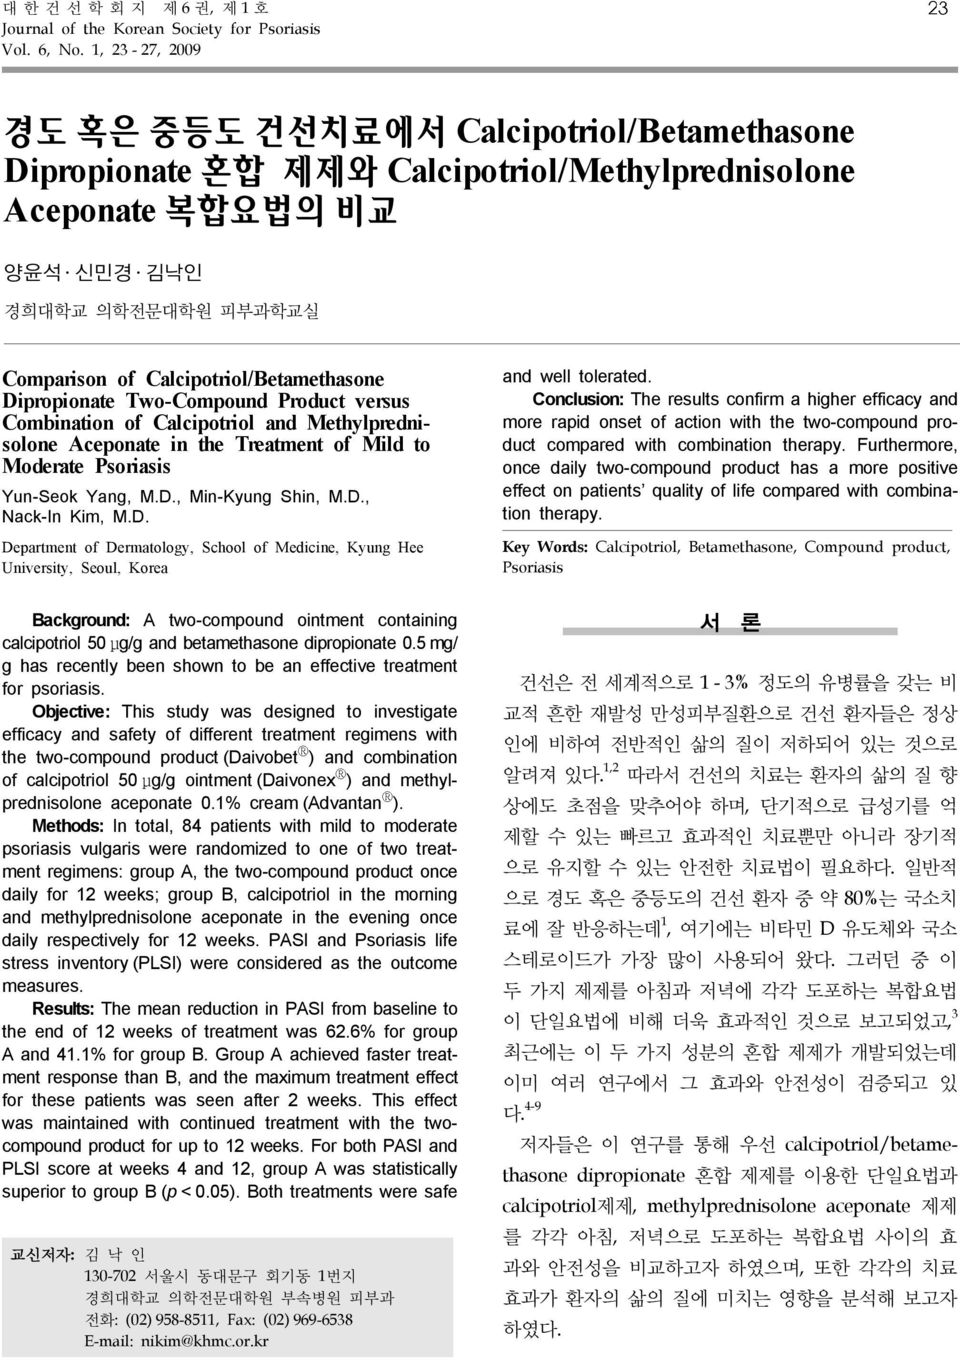 Calcipotriol/Betamethasone Dipropionate Two-Compound Product versus Combination of Calcipotriol and Methylprednisolone Aceponate in the Treatment of Mild to Moderate Psoriasis Yun-Seok Yang, M.D., Min-Kyung Shin, M.